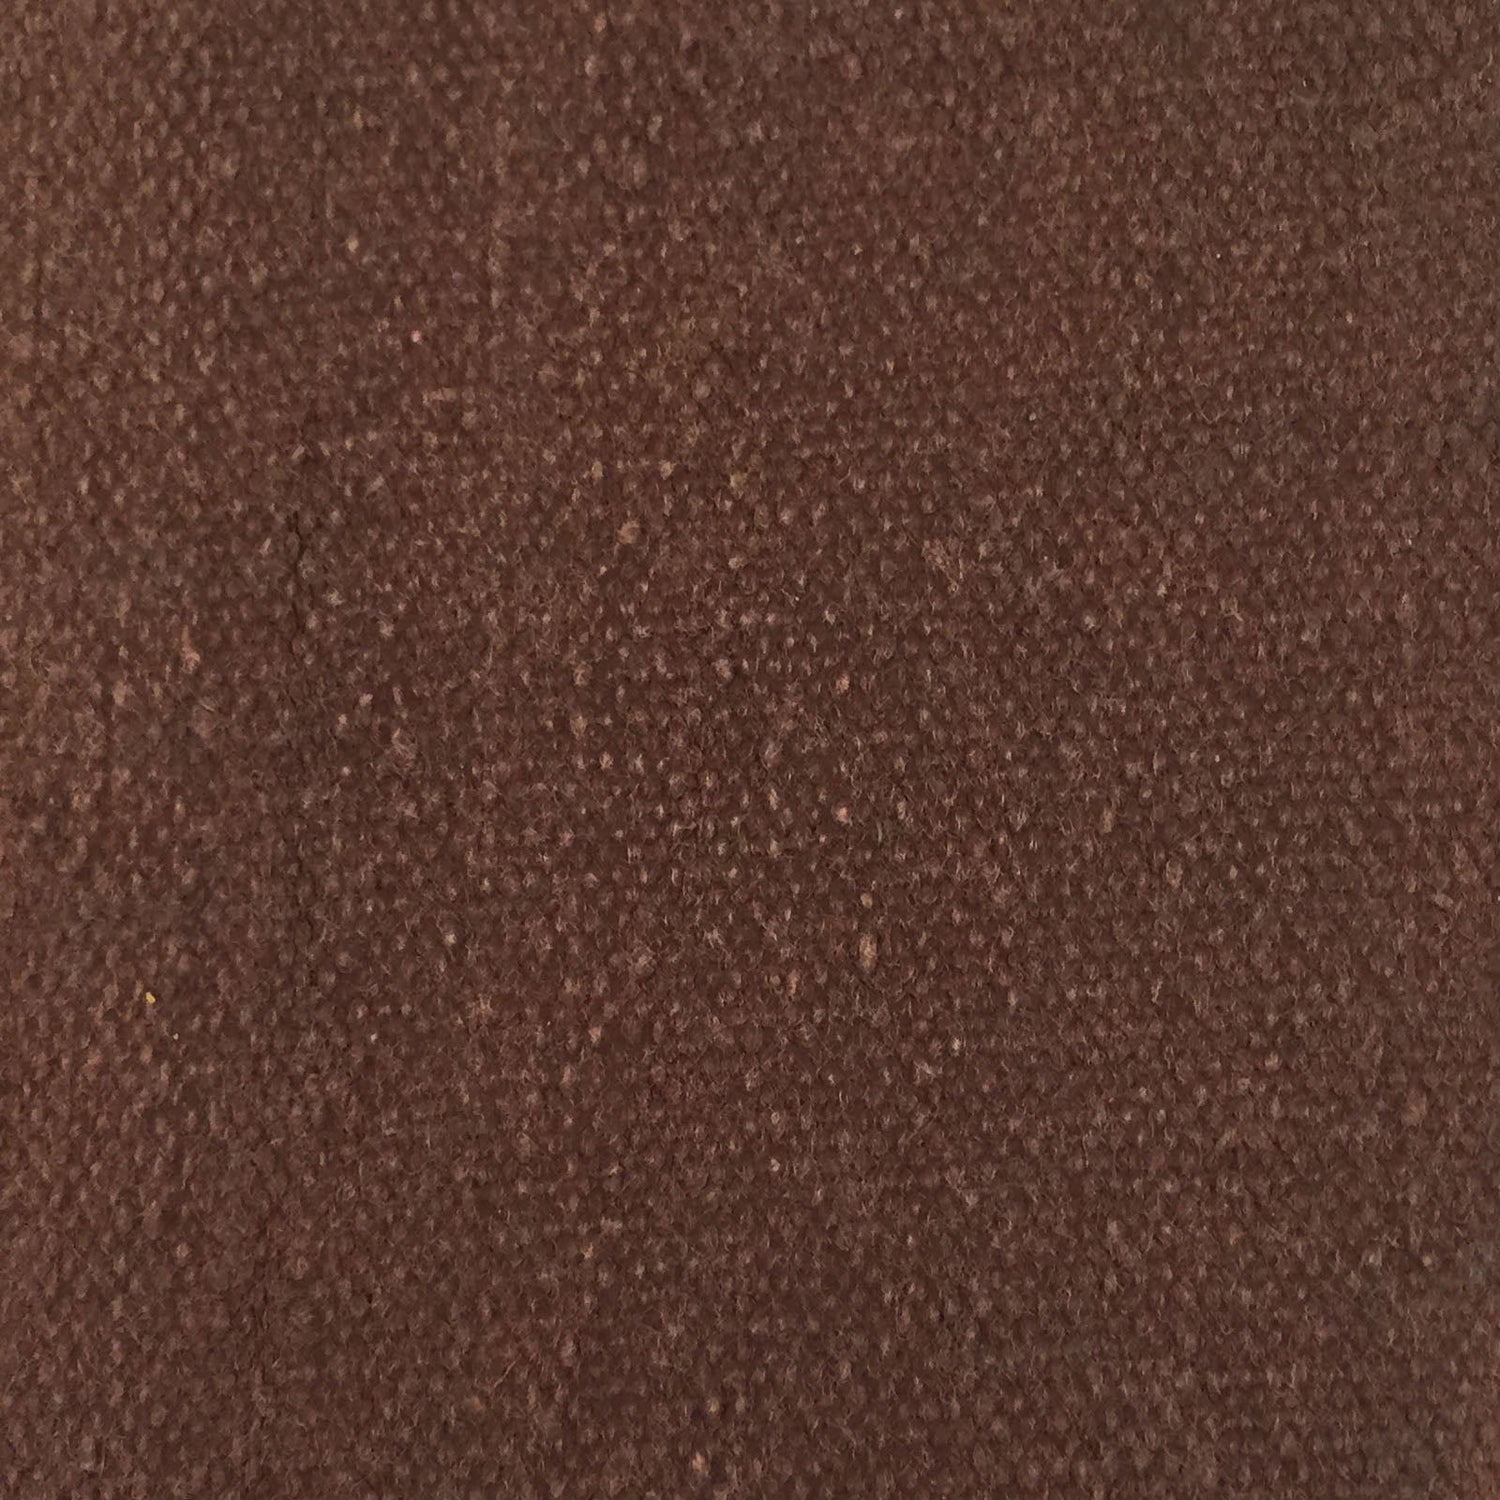 16 oz Canvas Treated Water Resistant Fabric [60" x 50 Yards]